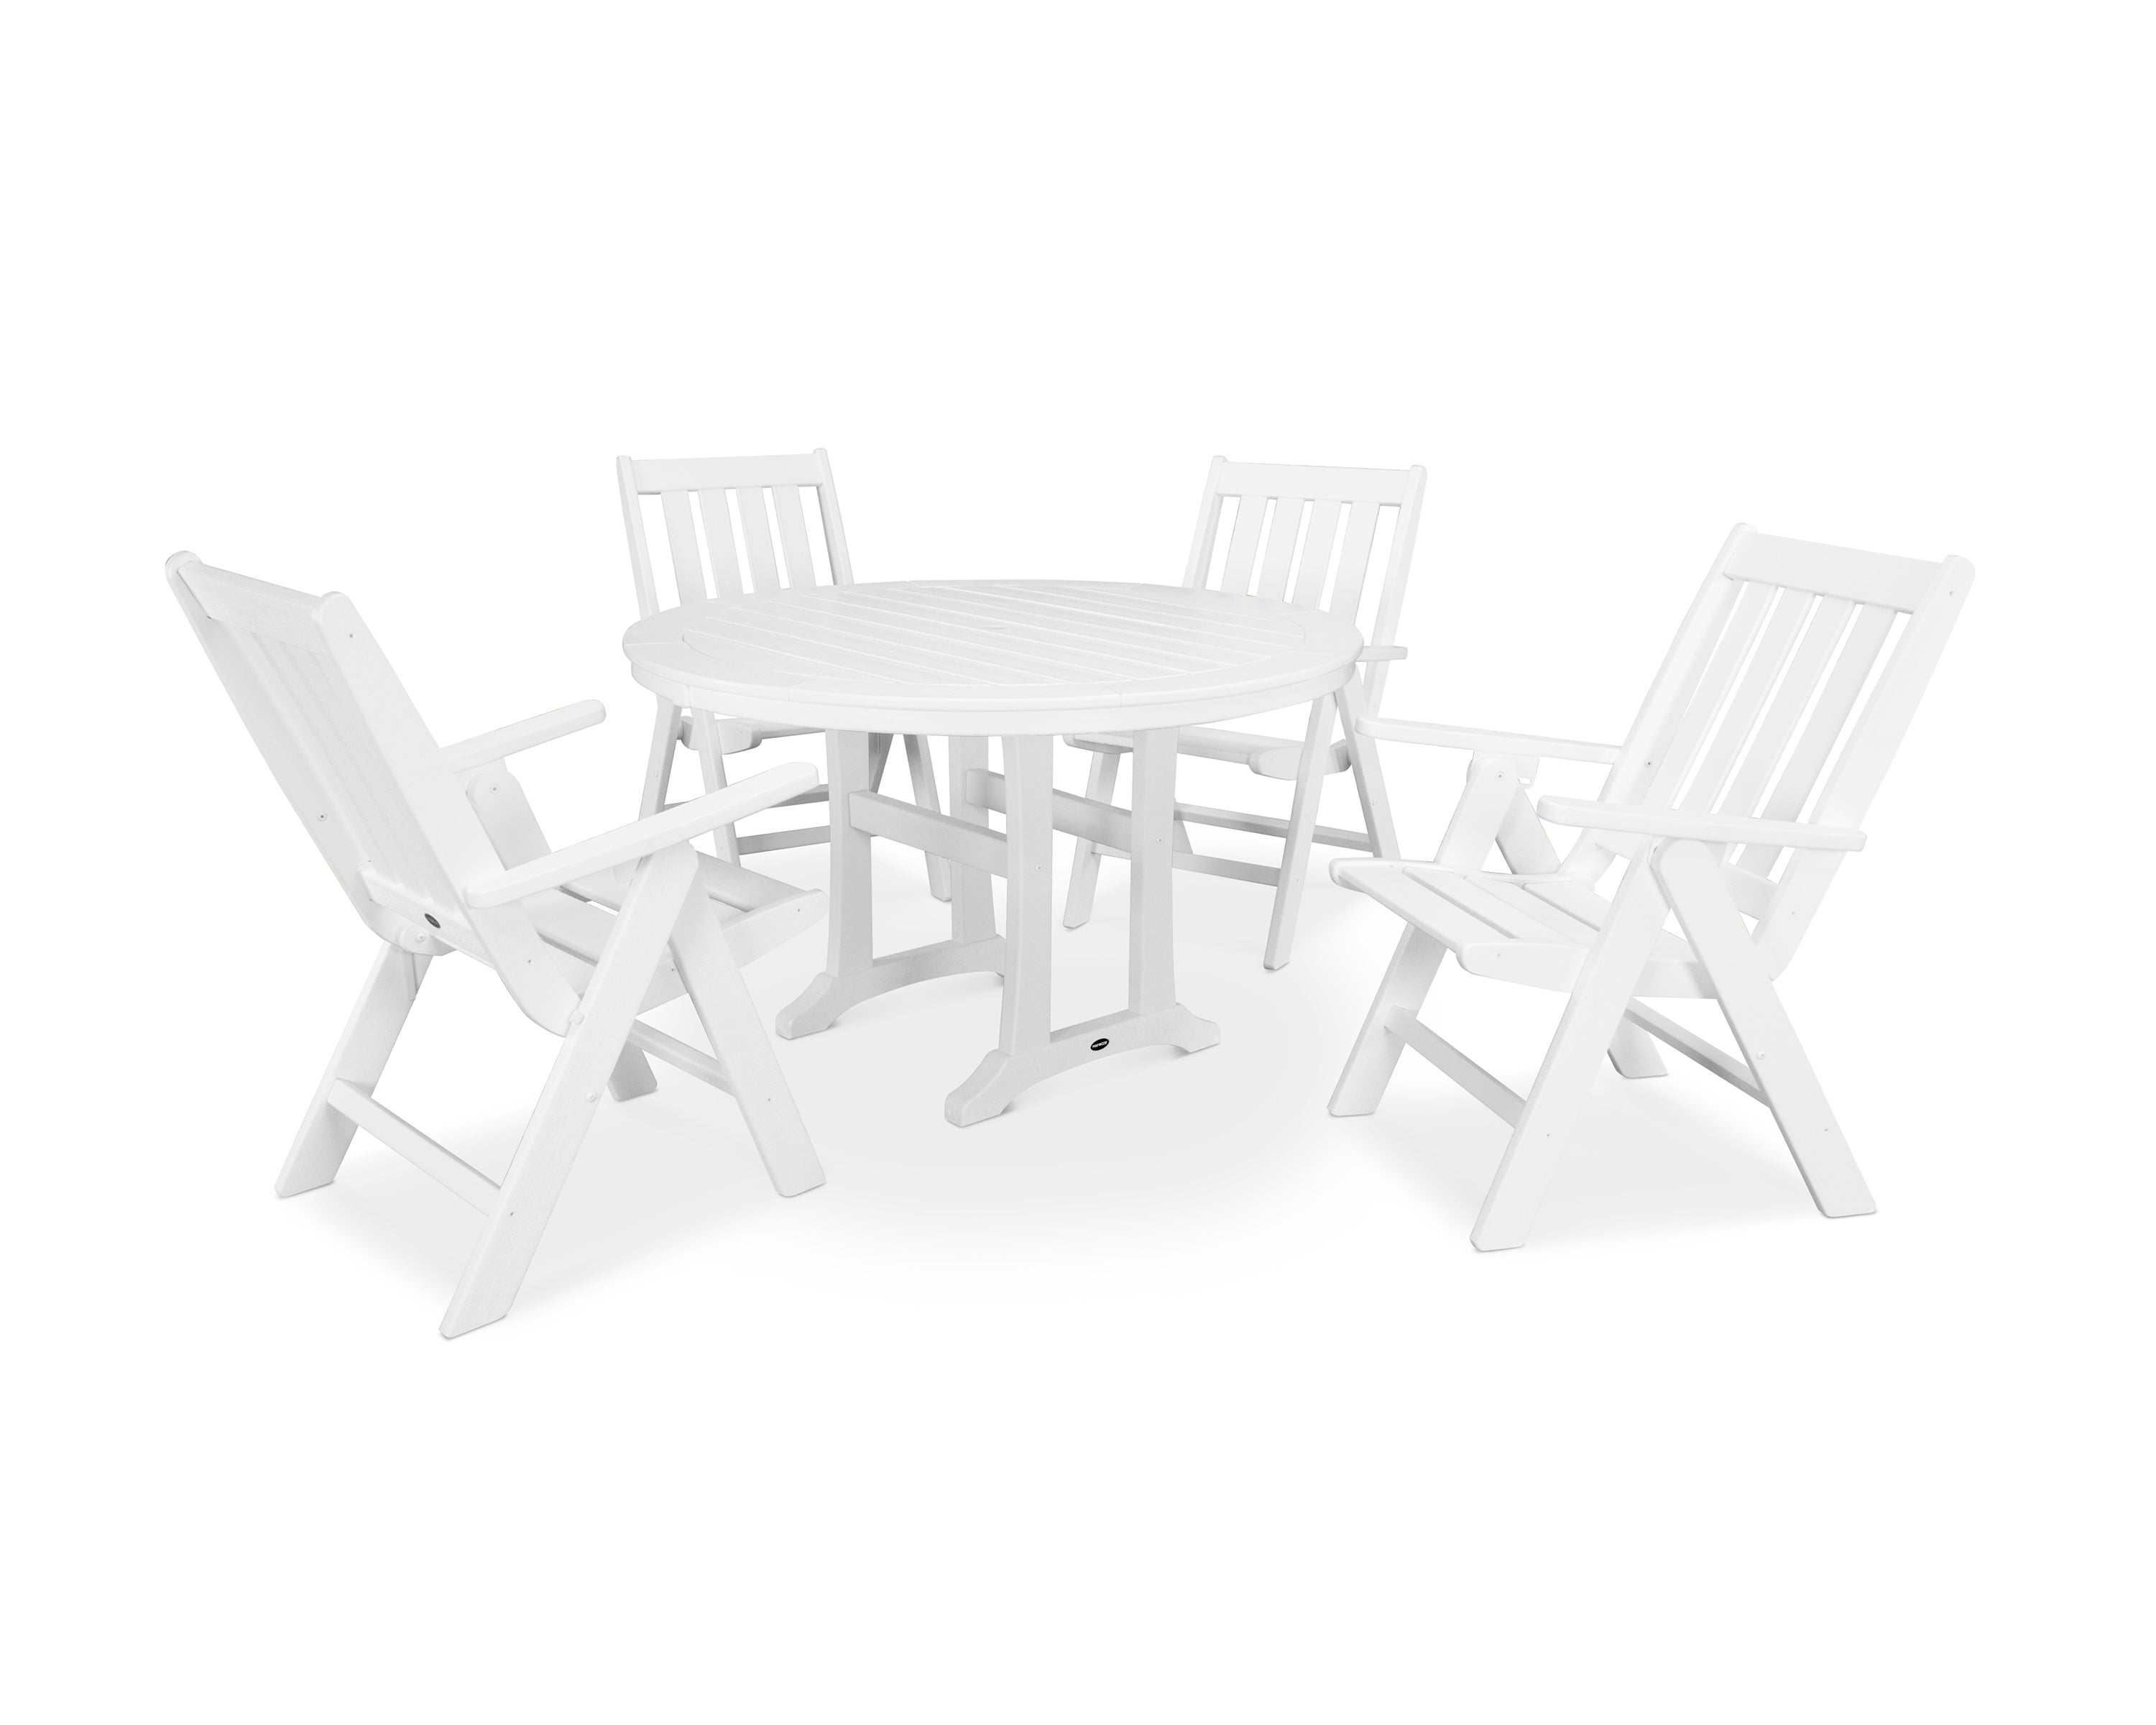 POLYWOOD® Vineyard Folding Chair 5-Piece Round Dining Set with Trestle Legs in Vintage White